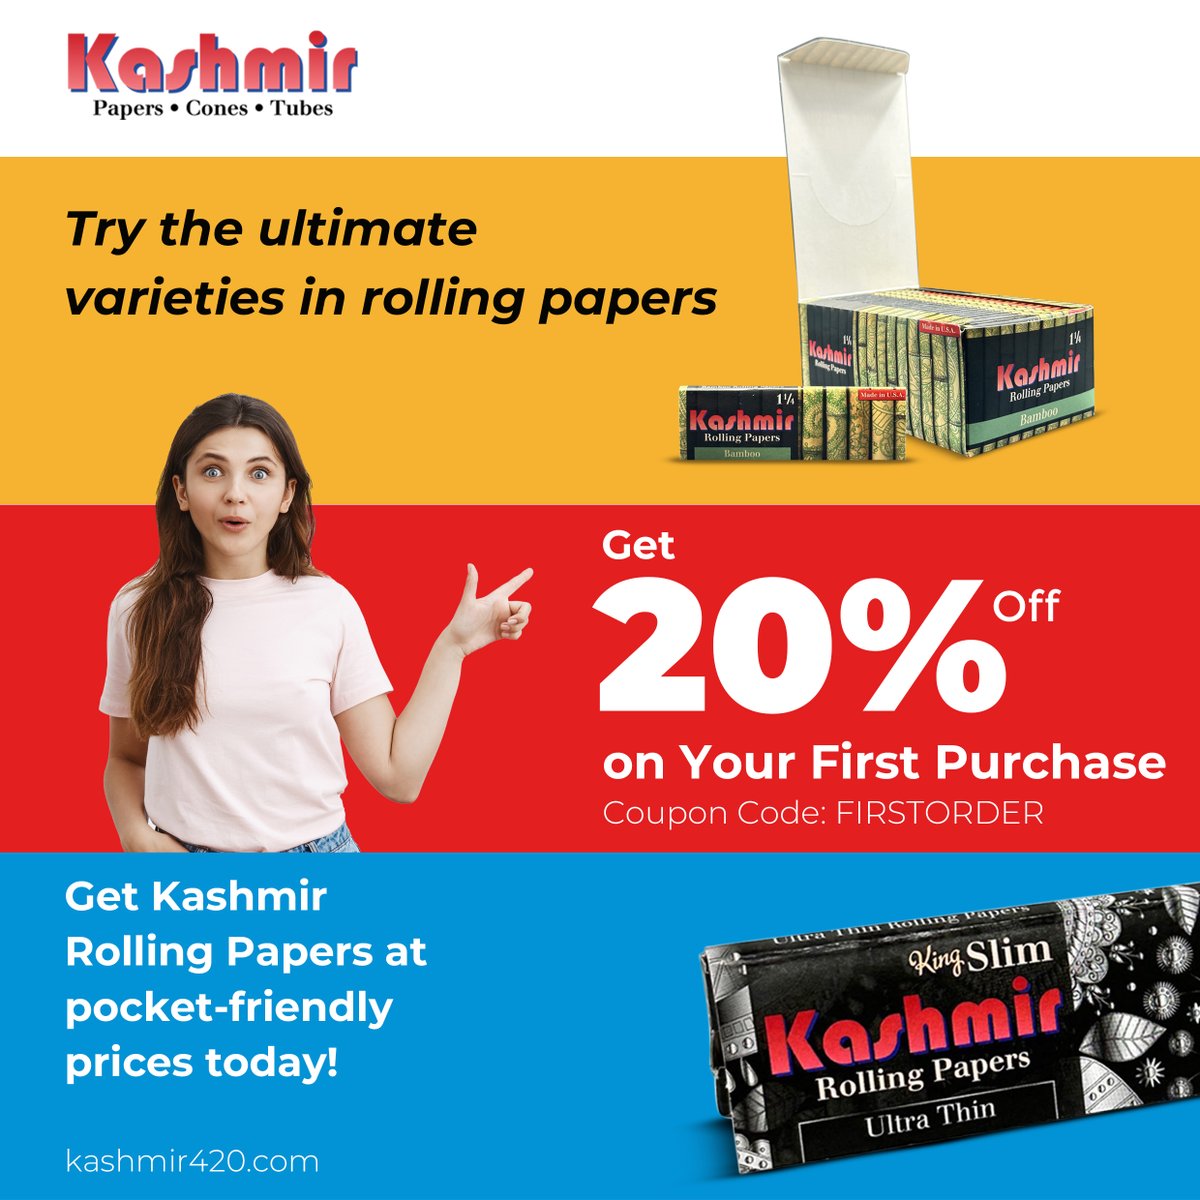 Roll into savings and style with our ultimate variety of Rolling Papers! 🔥Get 20% off on your first order and discover the smoothness of Kashmir Papers at pocket-friendly prices. Roll up and save today!🔥 Use Coupon Code: FIRSTORDER #RollingPaper #KashmirRollingPapers